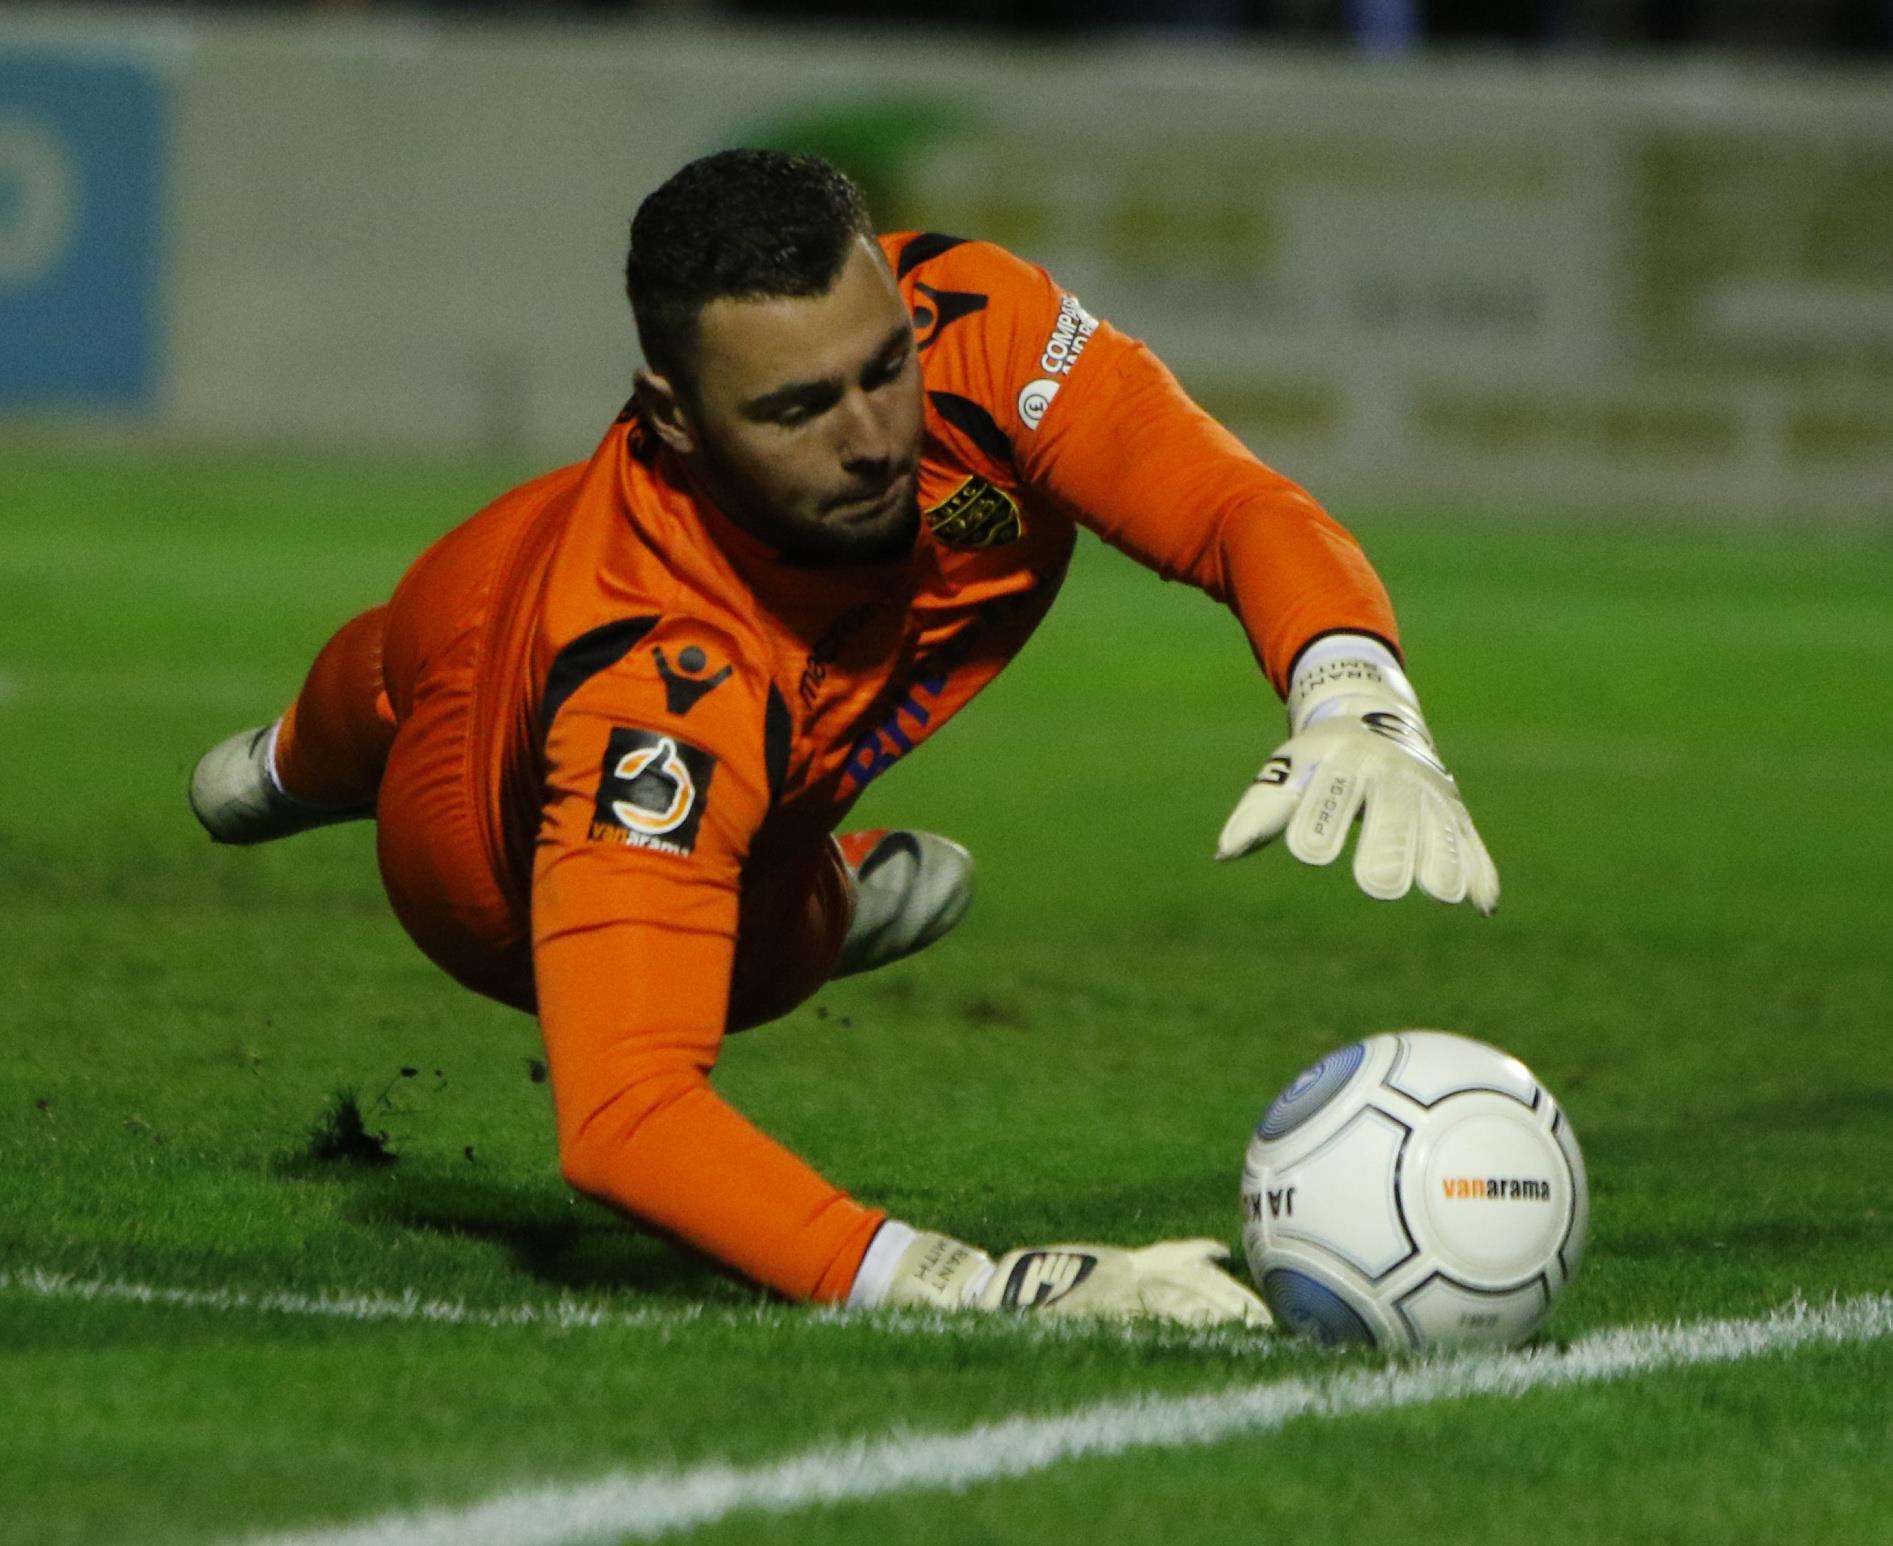 New Maidstone goalie Grant Smith in action at Ebbsfleet Picture: Andy Jones